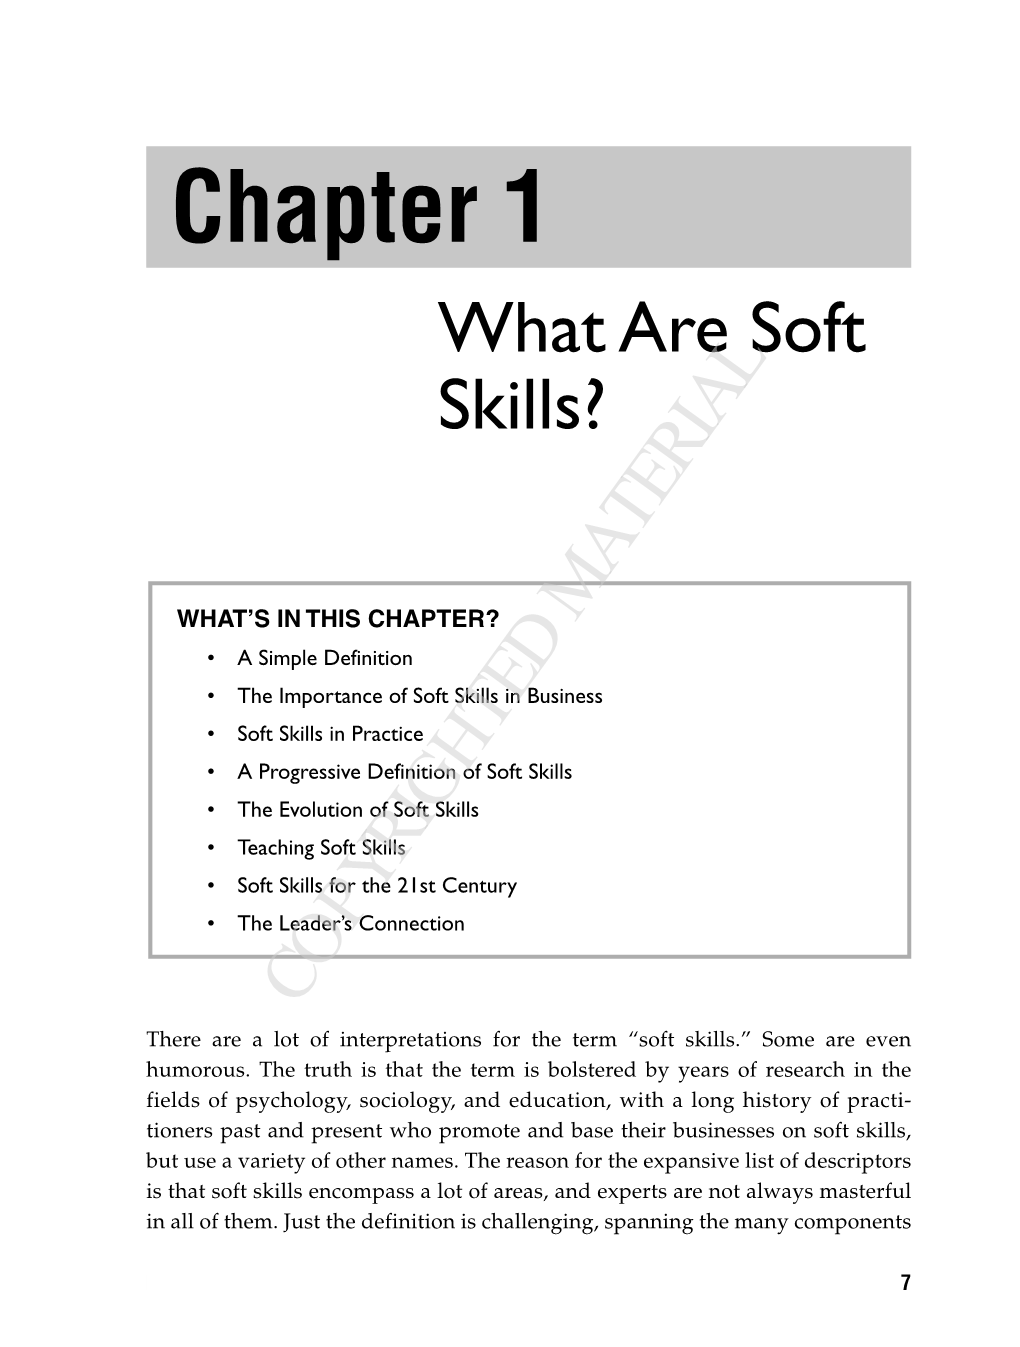 Chapter 1 What Are Soft Skills?